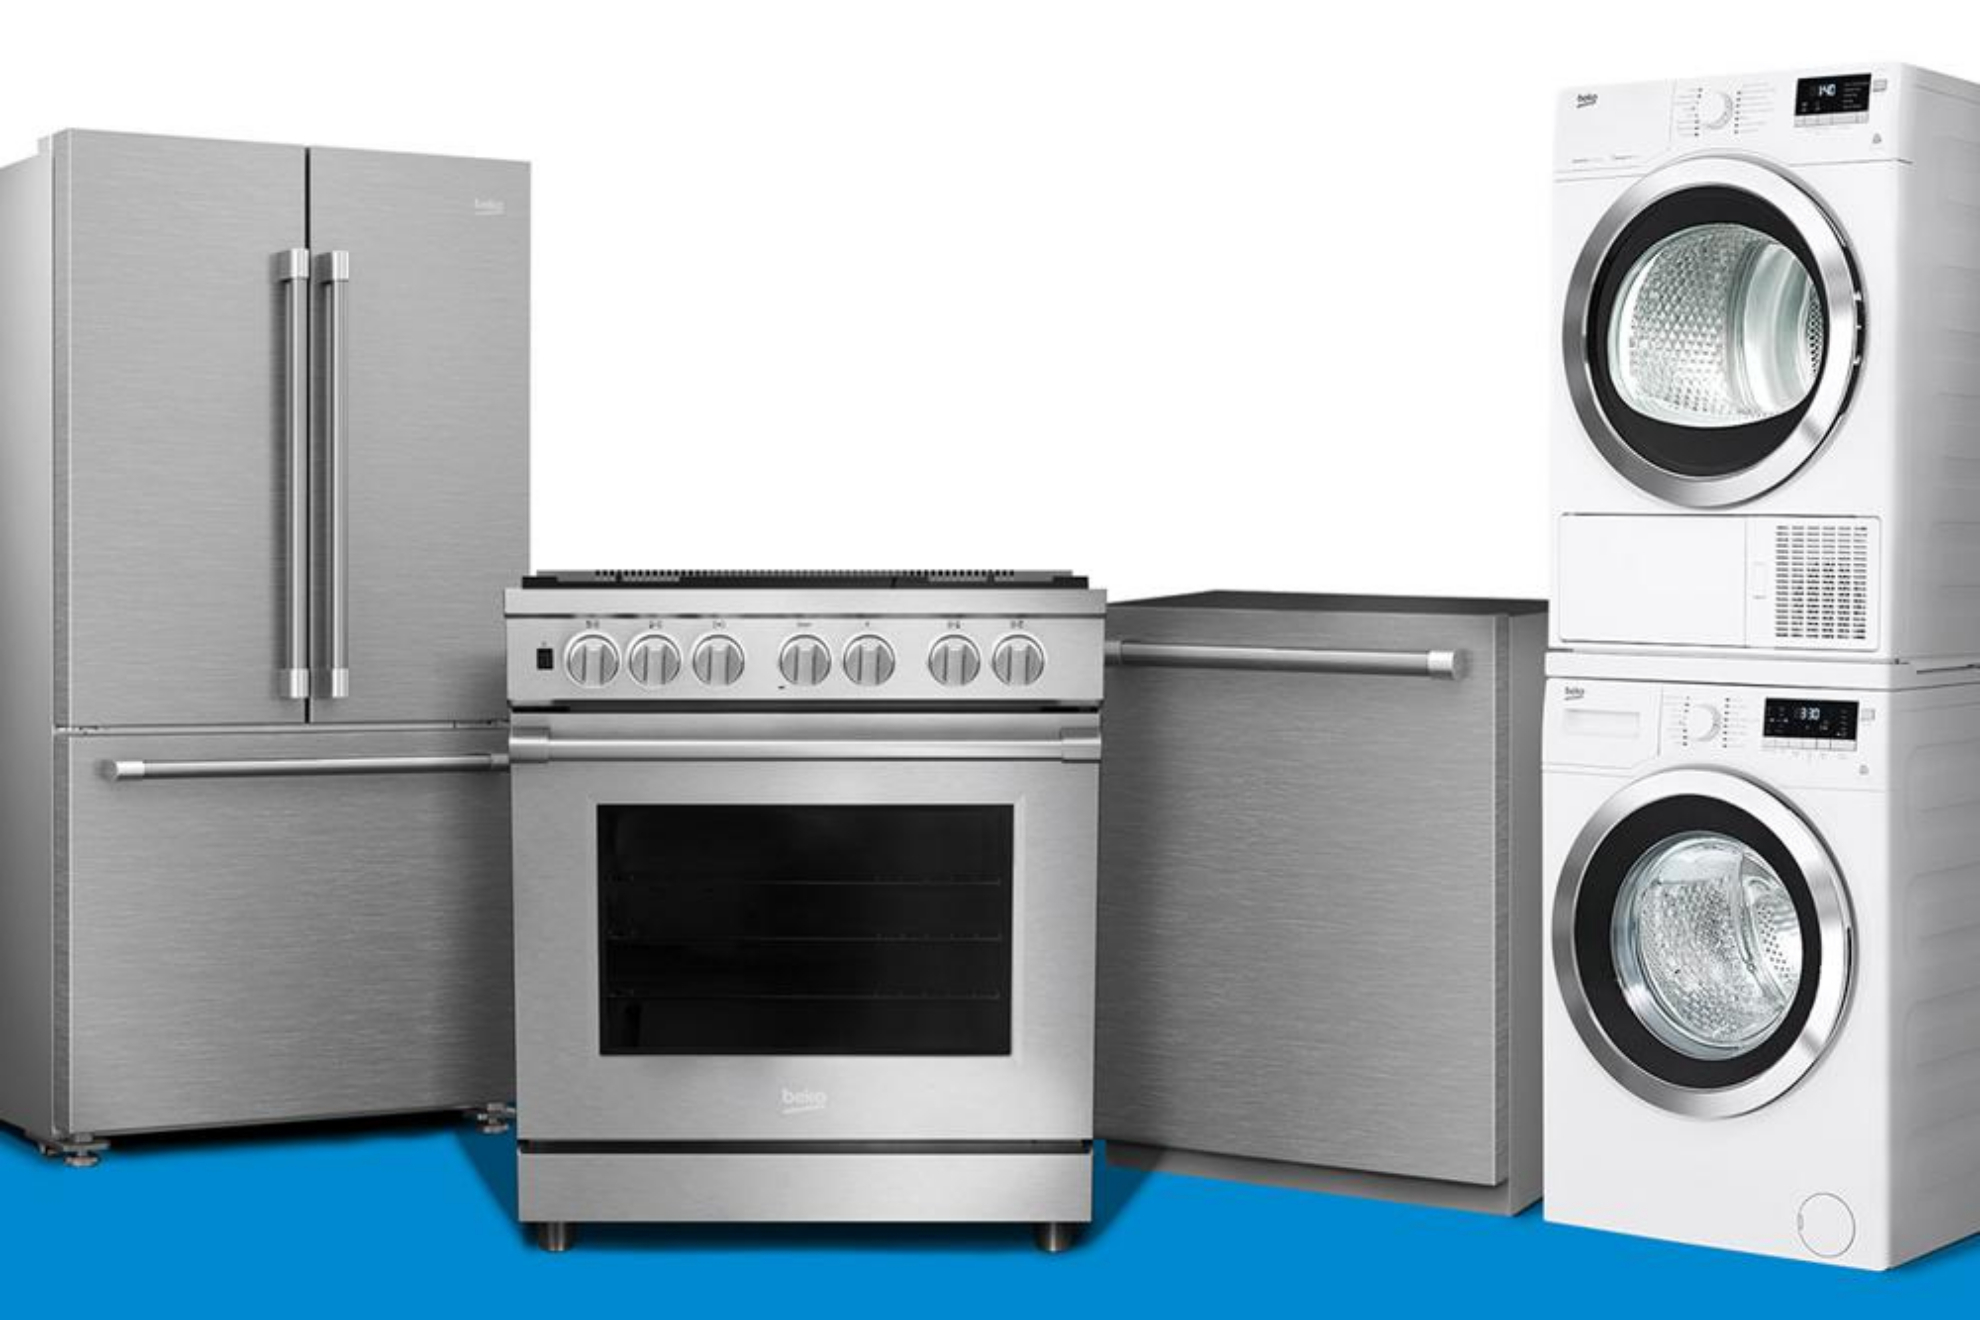 Energy Assistance: How to get a payment of up to $4,000 to renovate appliances?